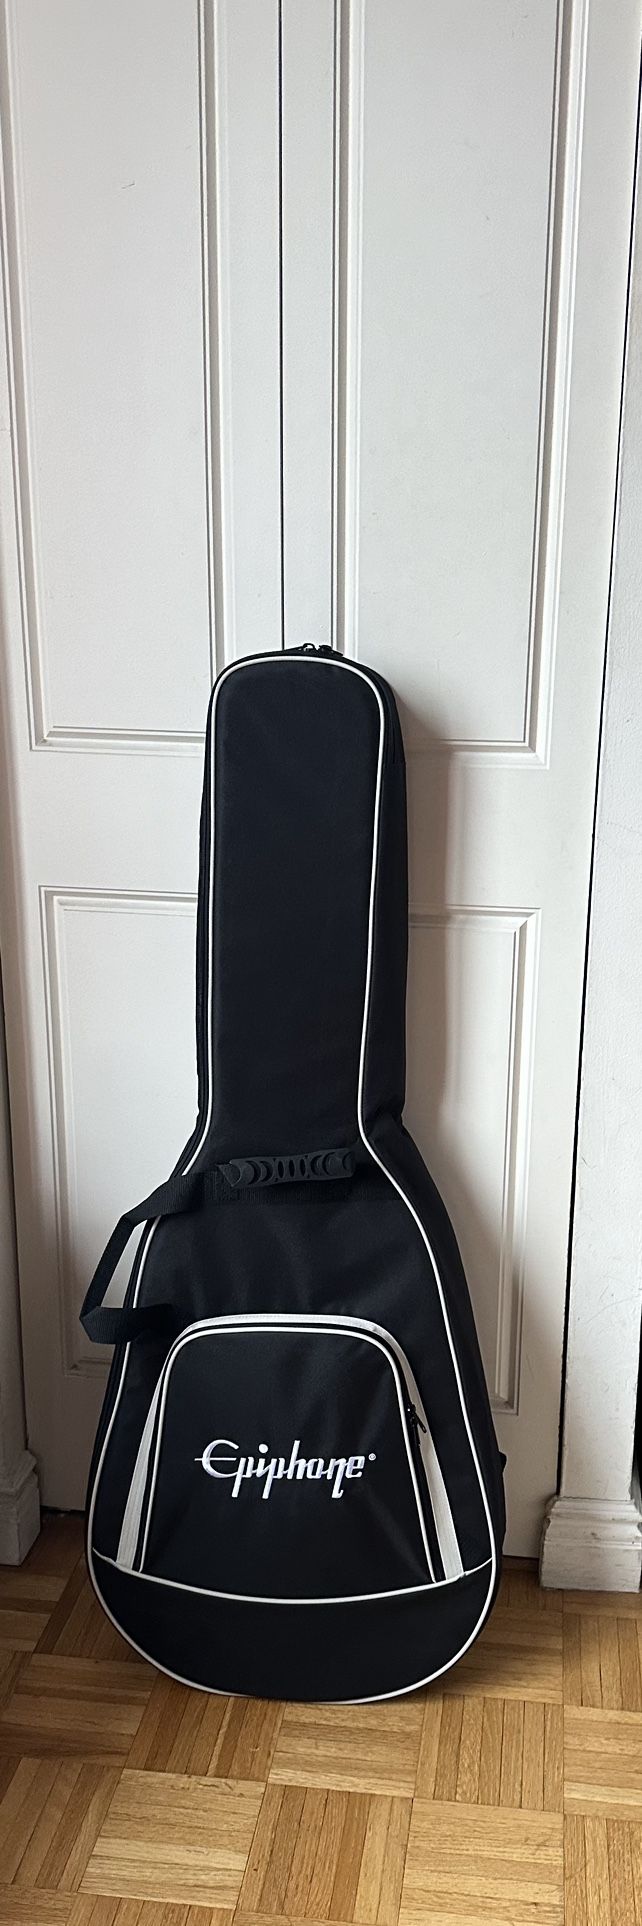 EPIPHONE Gig Bag For Archtop/Acoustic Guitar:As new.